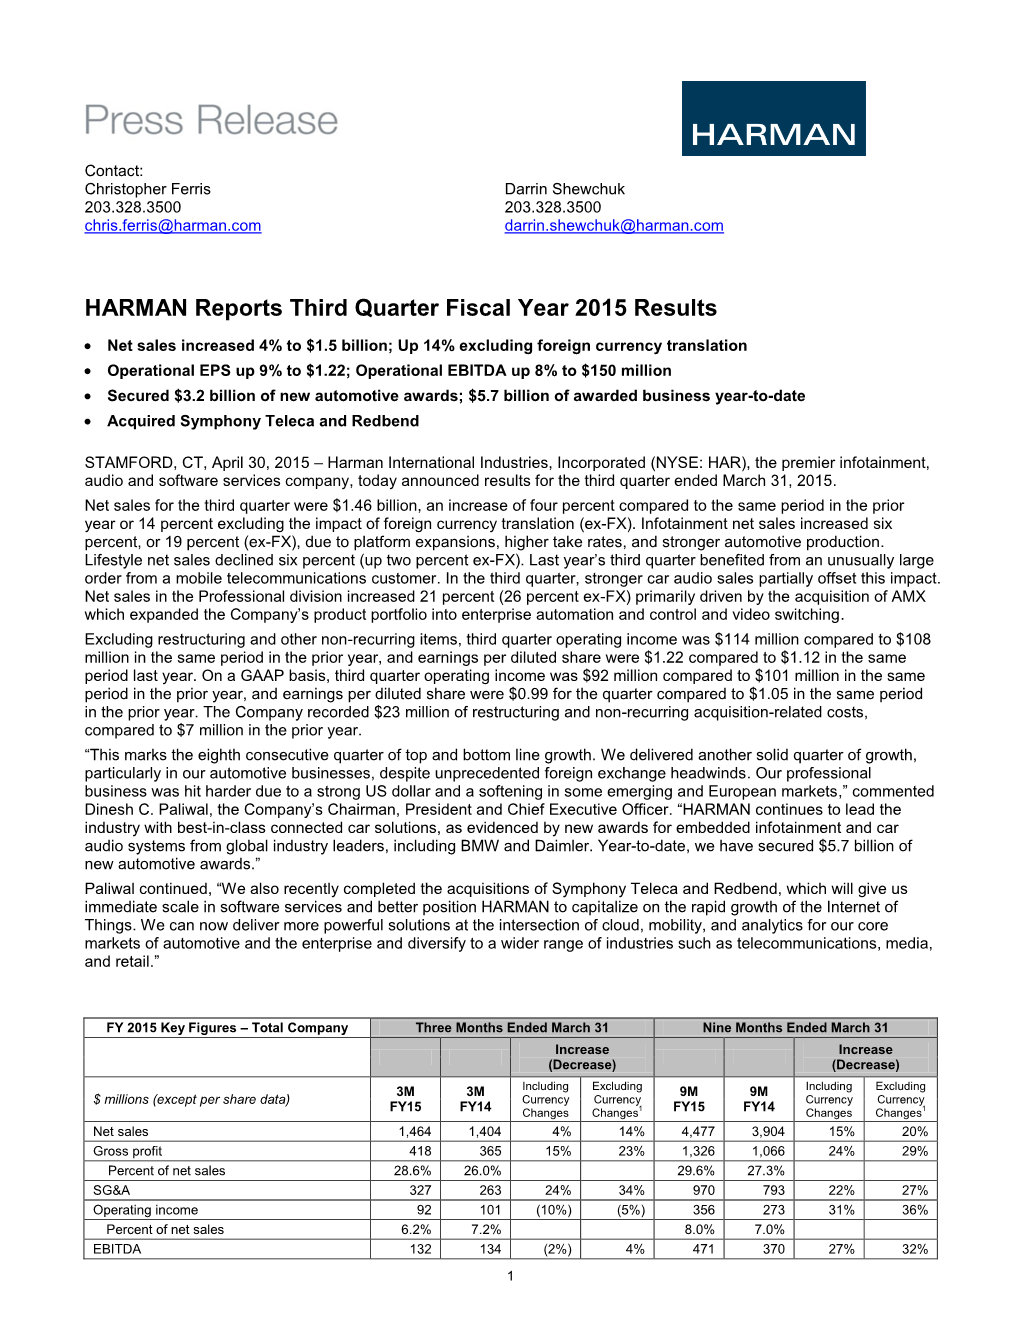 HARMAN Reports Third Quarter Fiscal Year 2015 Results